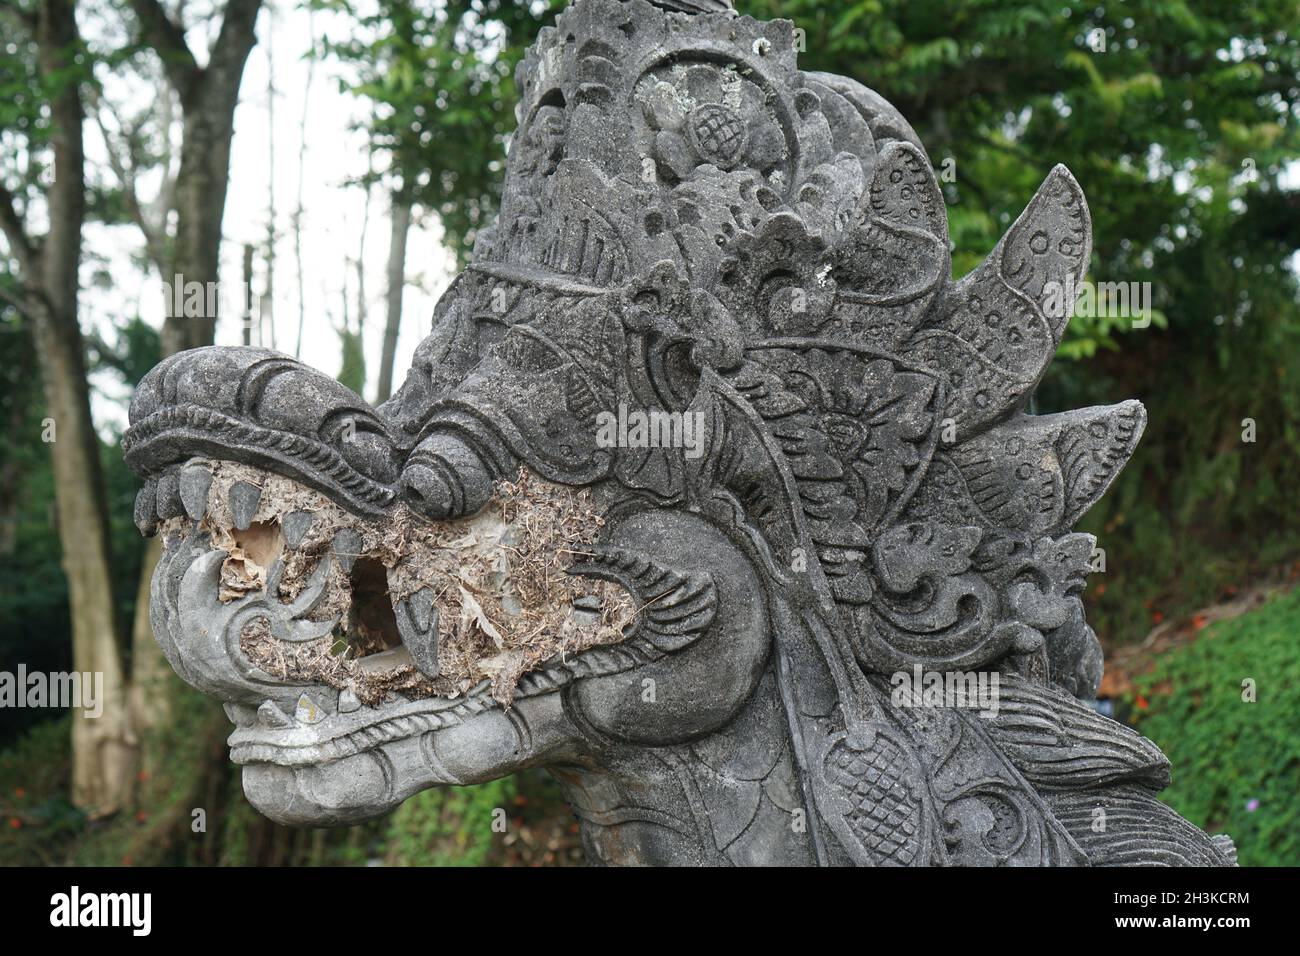 Traditional hindu statue of dragon's head in the garden in Bali Stock Photo